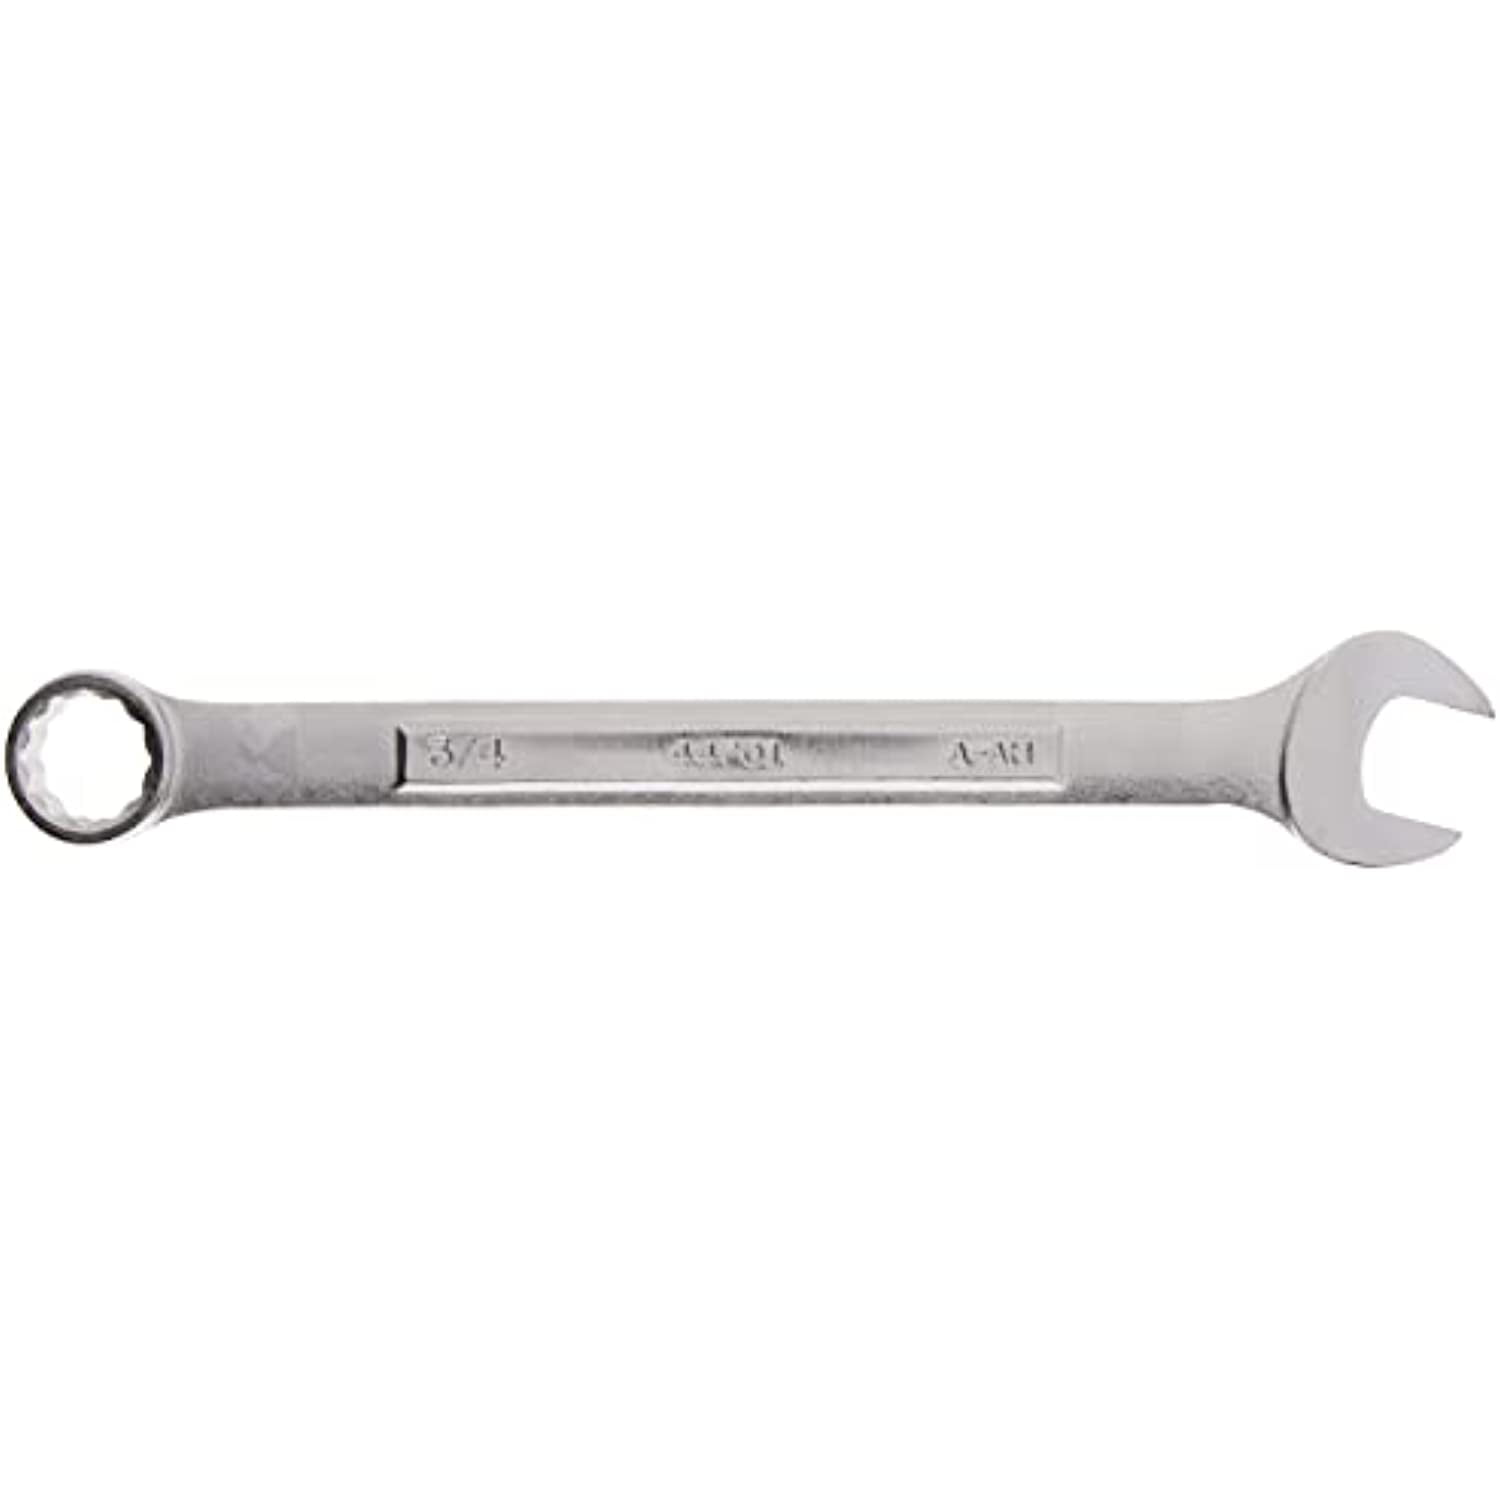 CMMT44701 SAE 3/4-Inch CRAFTSMAN Combination Wrench 